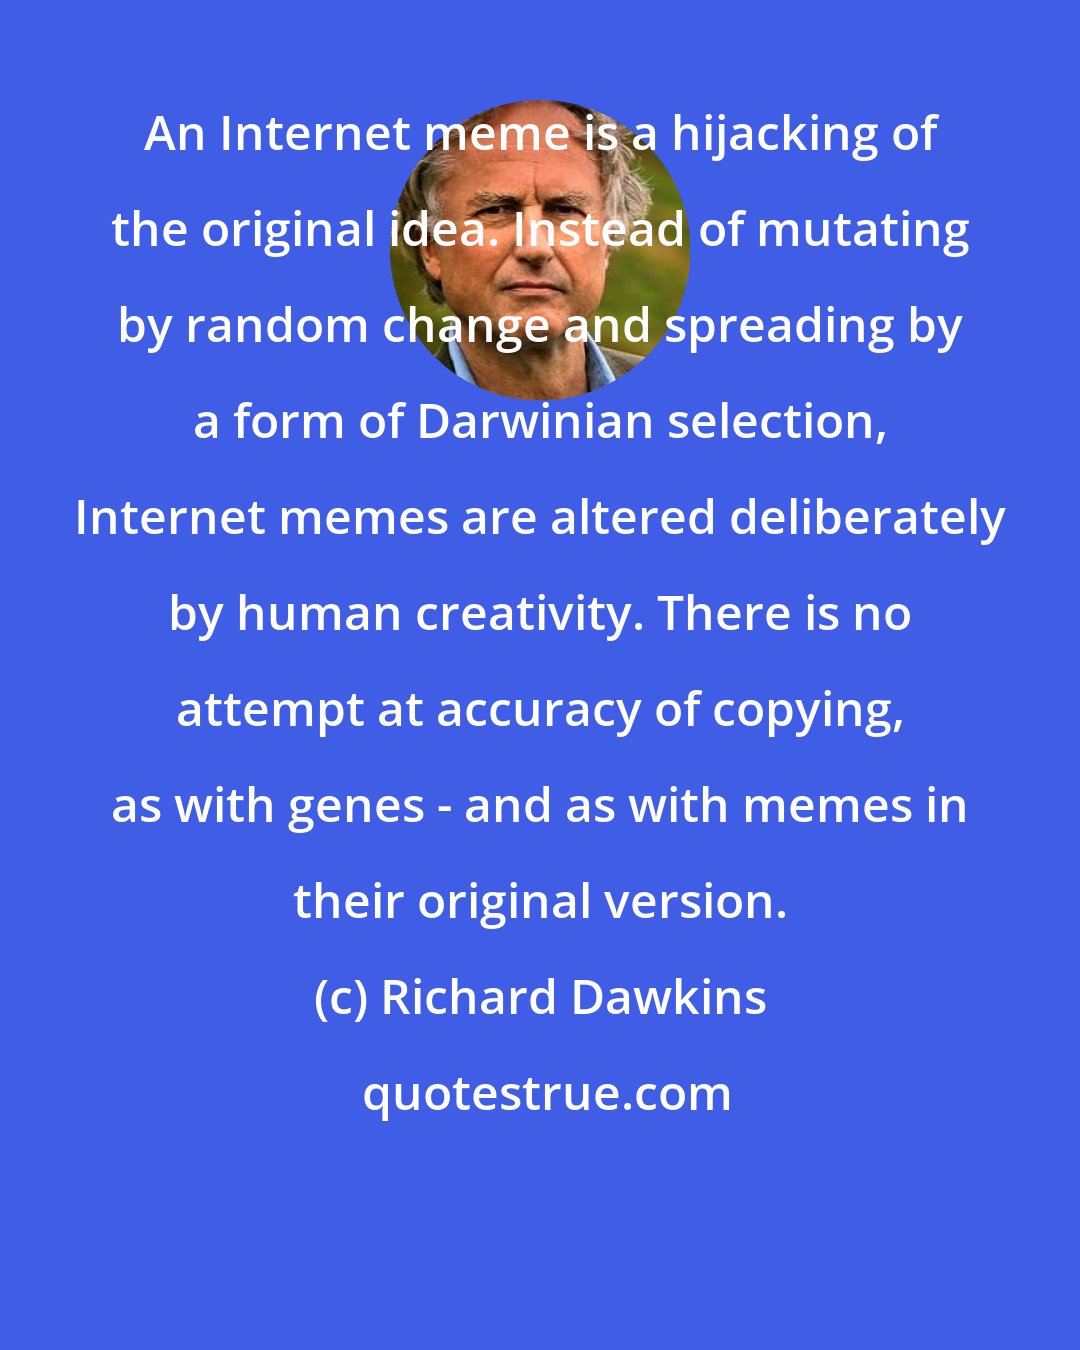 Richard Dawkins: An Internet meme is a hijacking of the original idea. Instead of mutating by random change and spreading by a form of Darwinian selection, Internet memes are altered deliberately by human creativity. There is no attempt at accuracy of copying, as with genes - and as with memes in their original version.